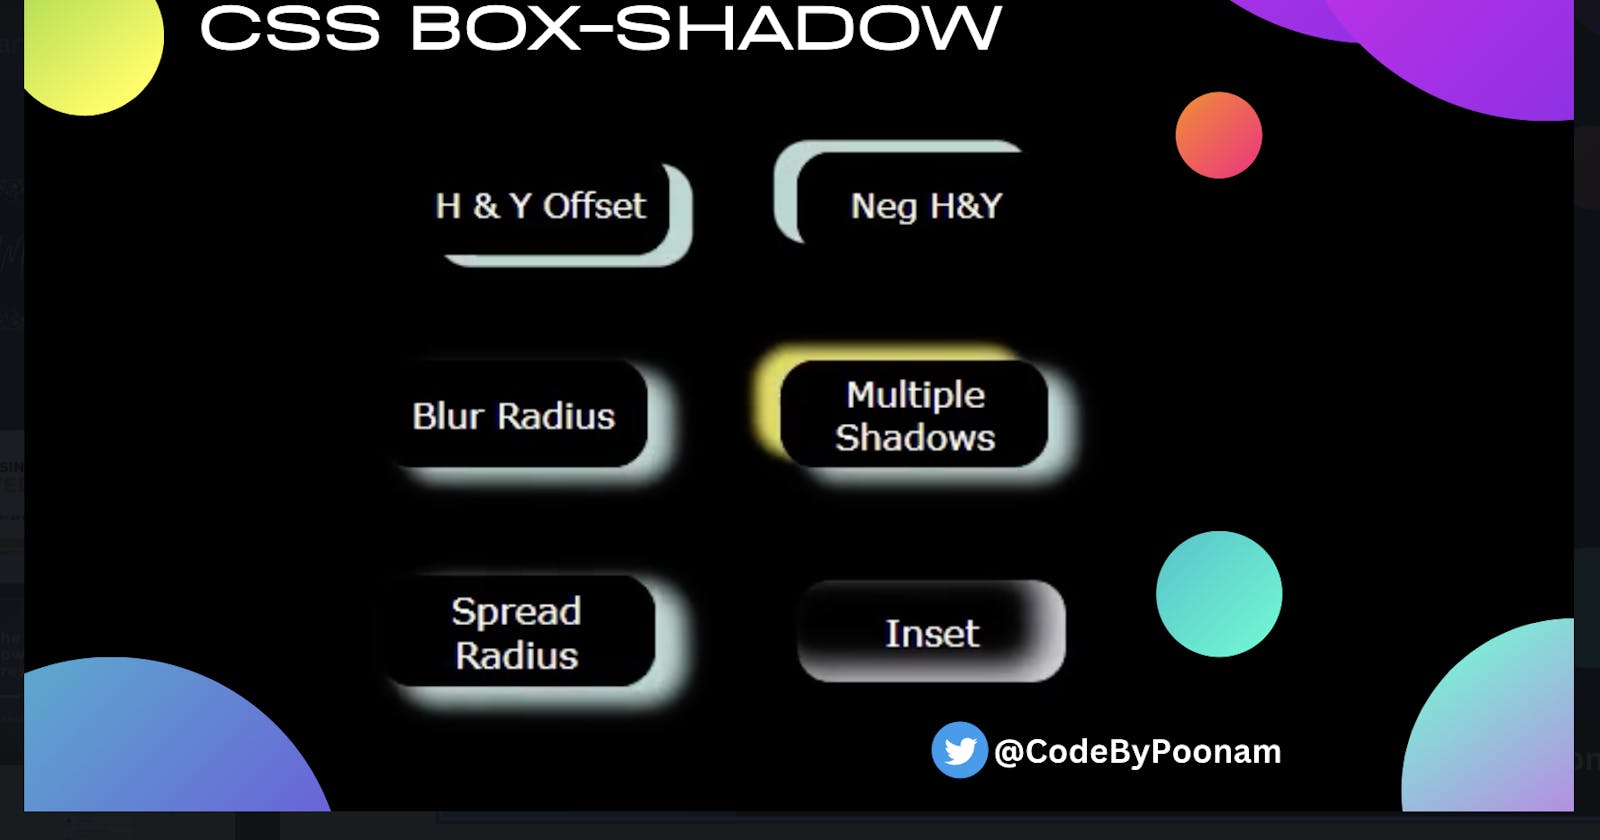 Make your website stand out with CSS box-shadow